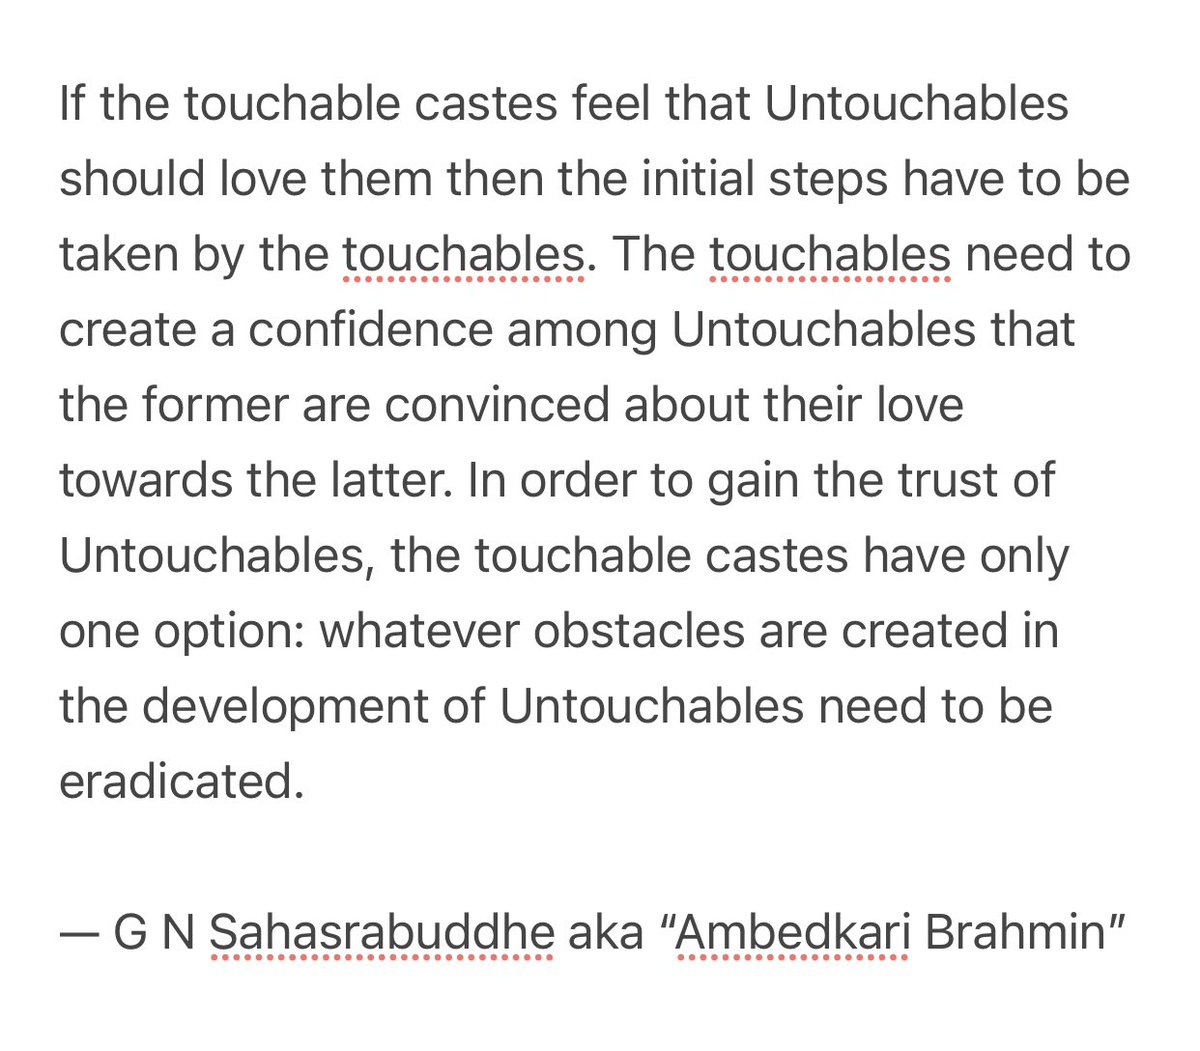 Sahasrabuddhe’s famous speech exhorting touchables on 19 March 1927 at the first Mahad Conference is a wise lesson for savarnas of our times: